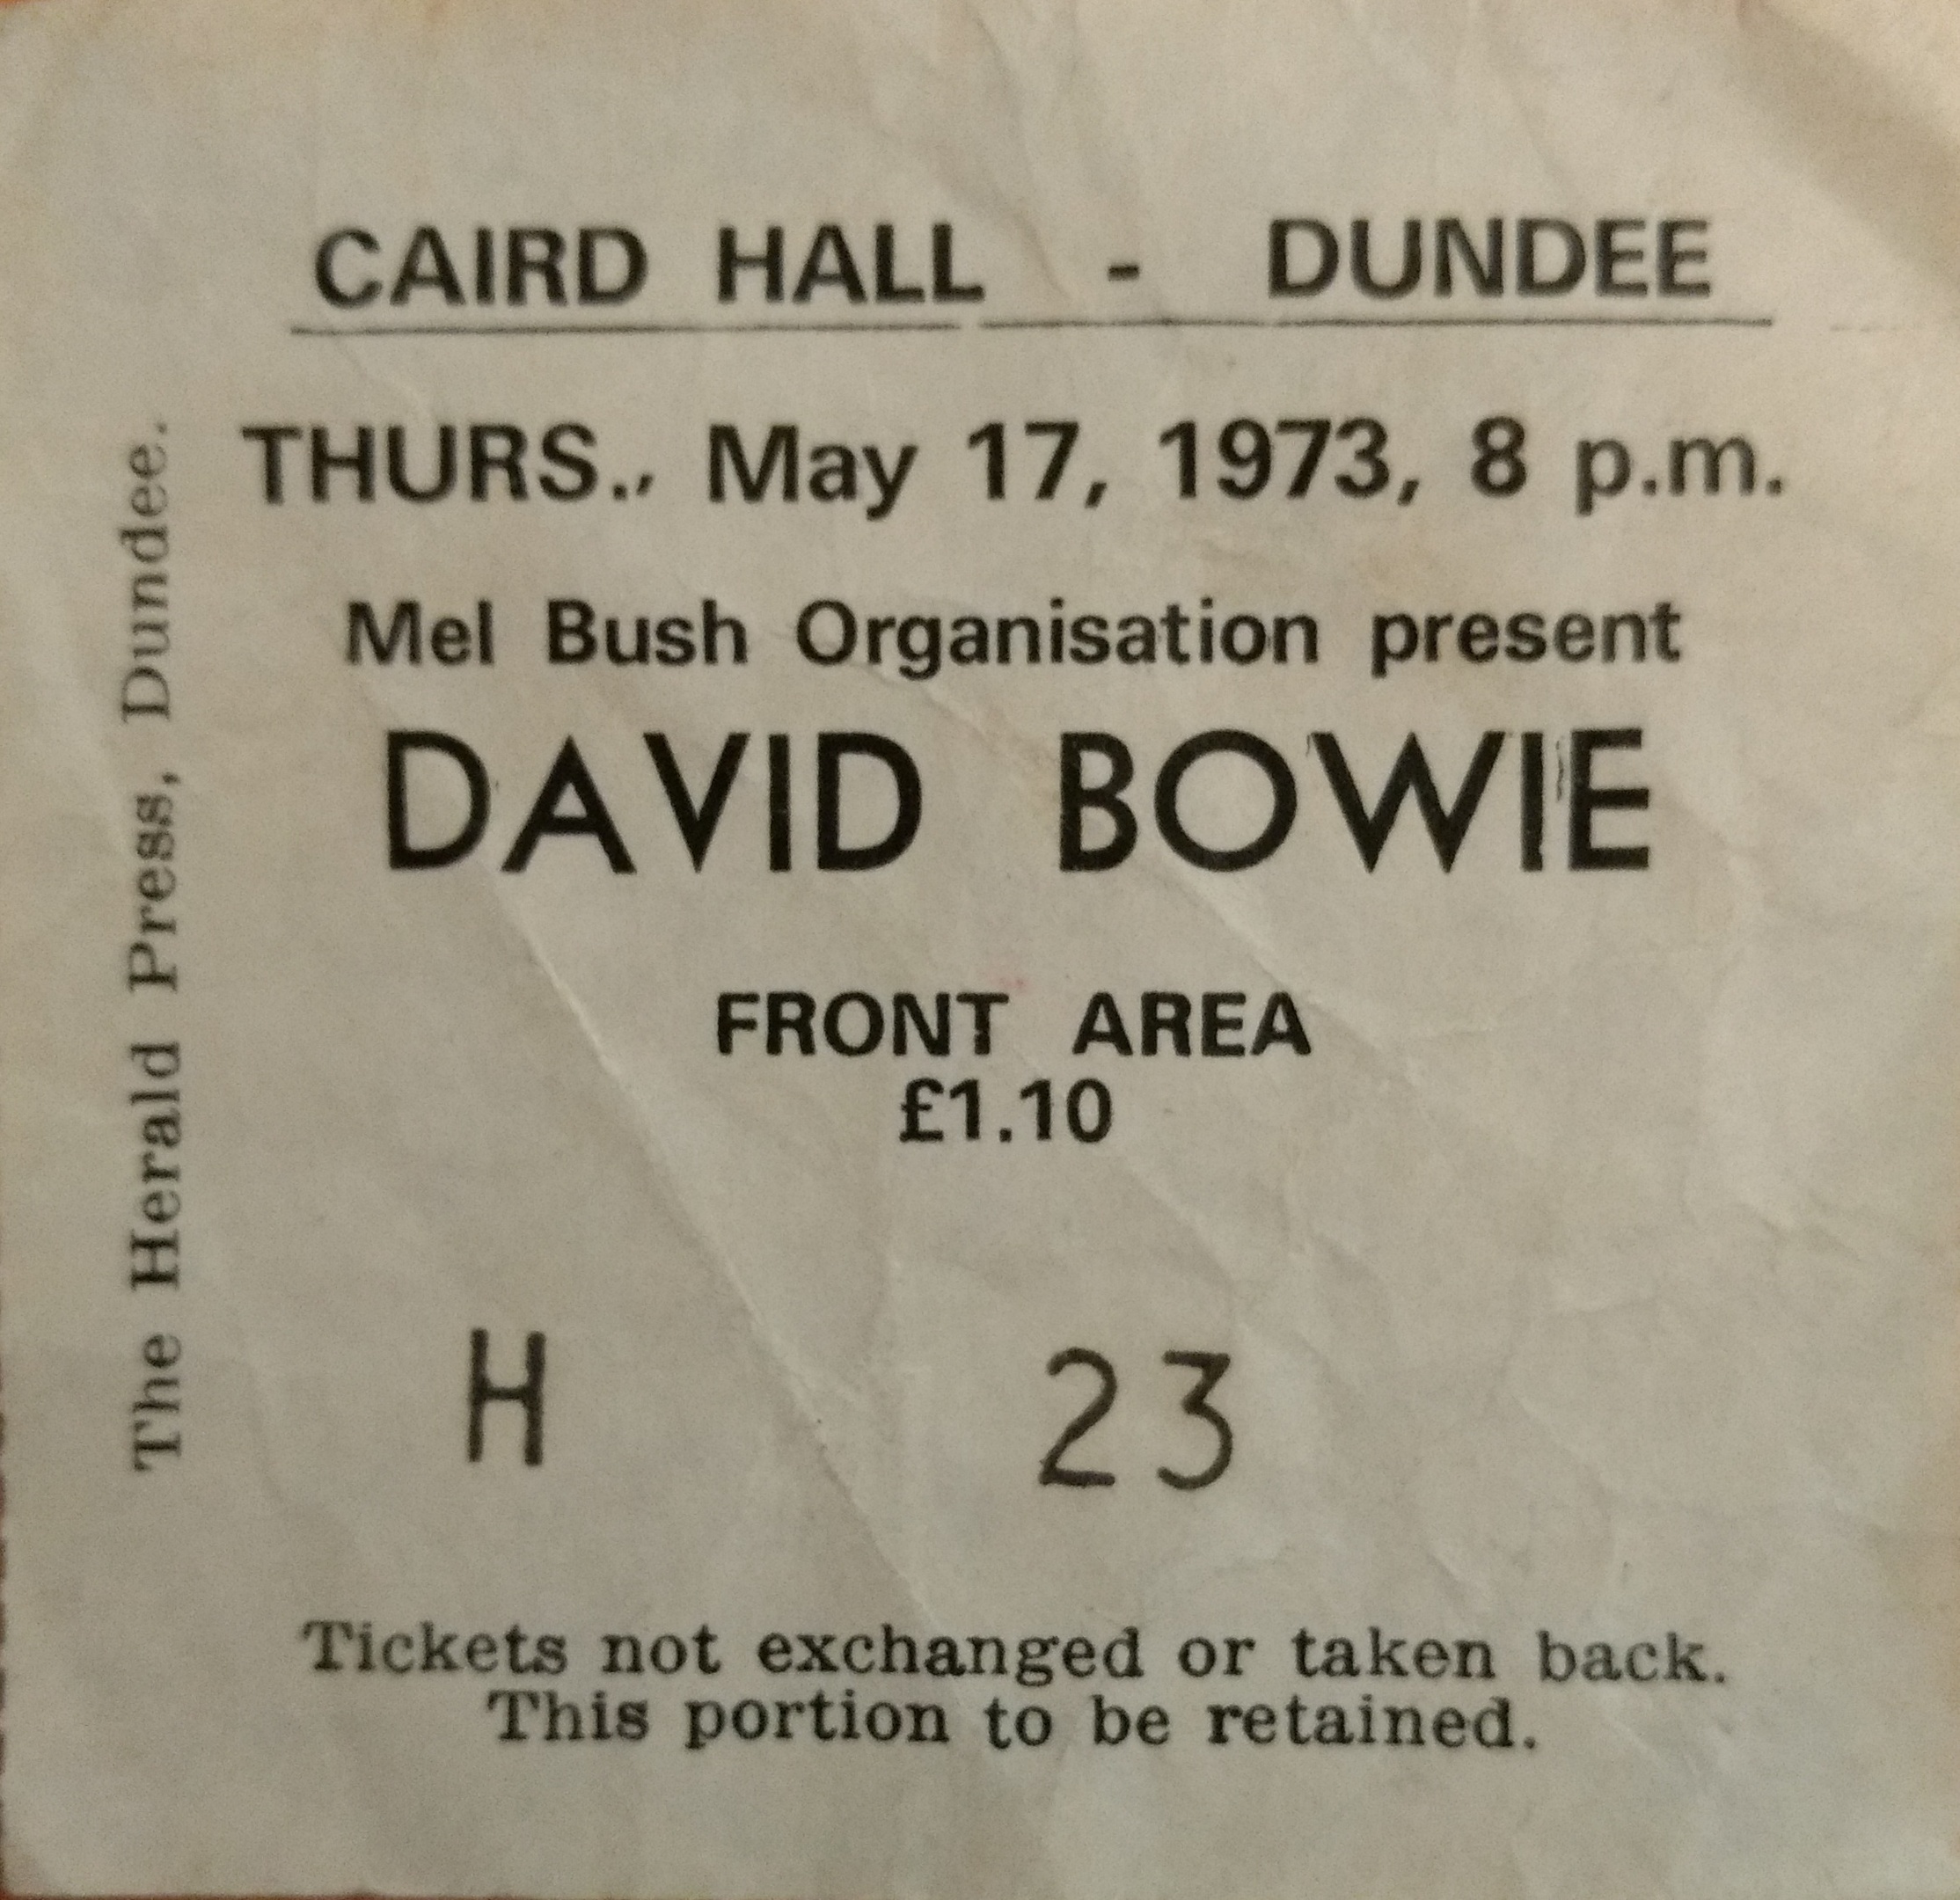 David Bowie Dundee concert ticket (private collection).